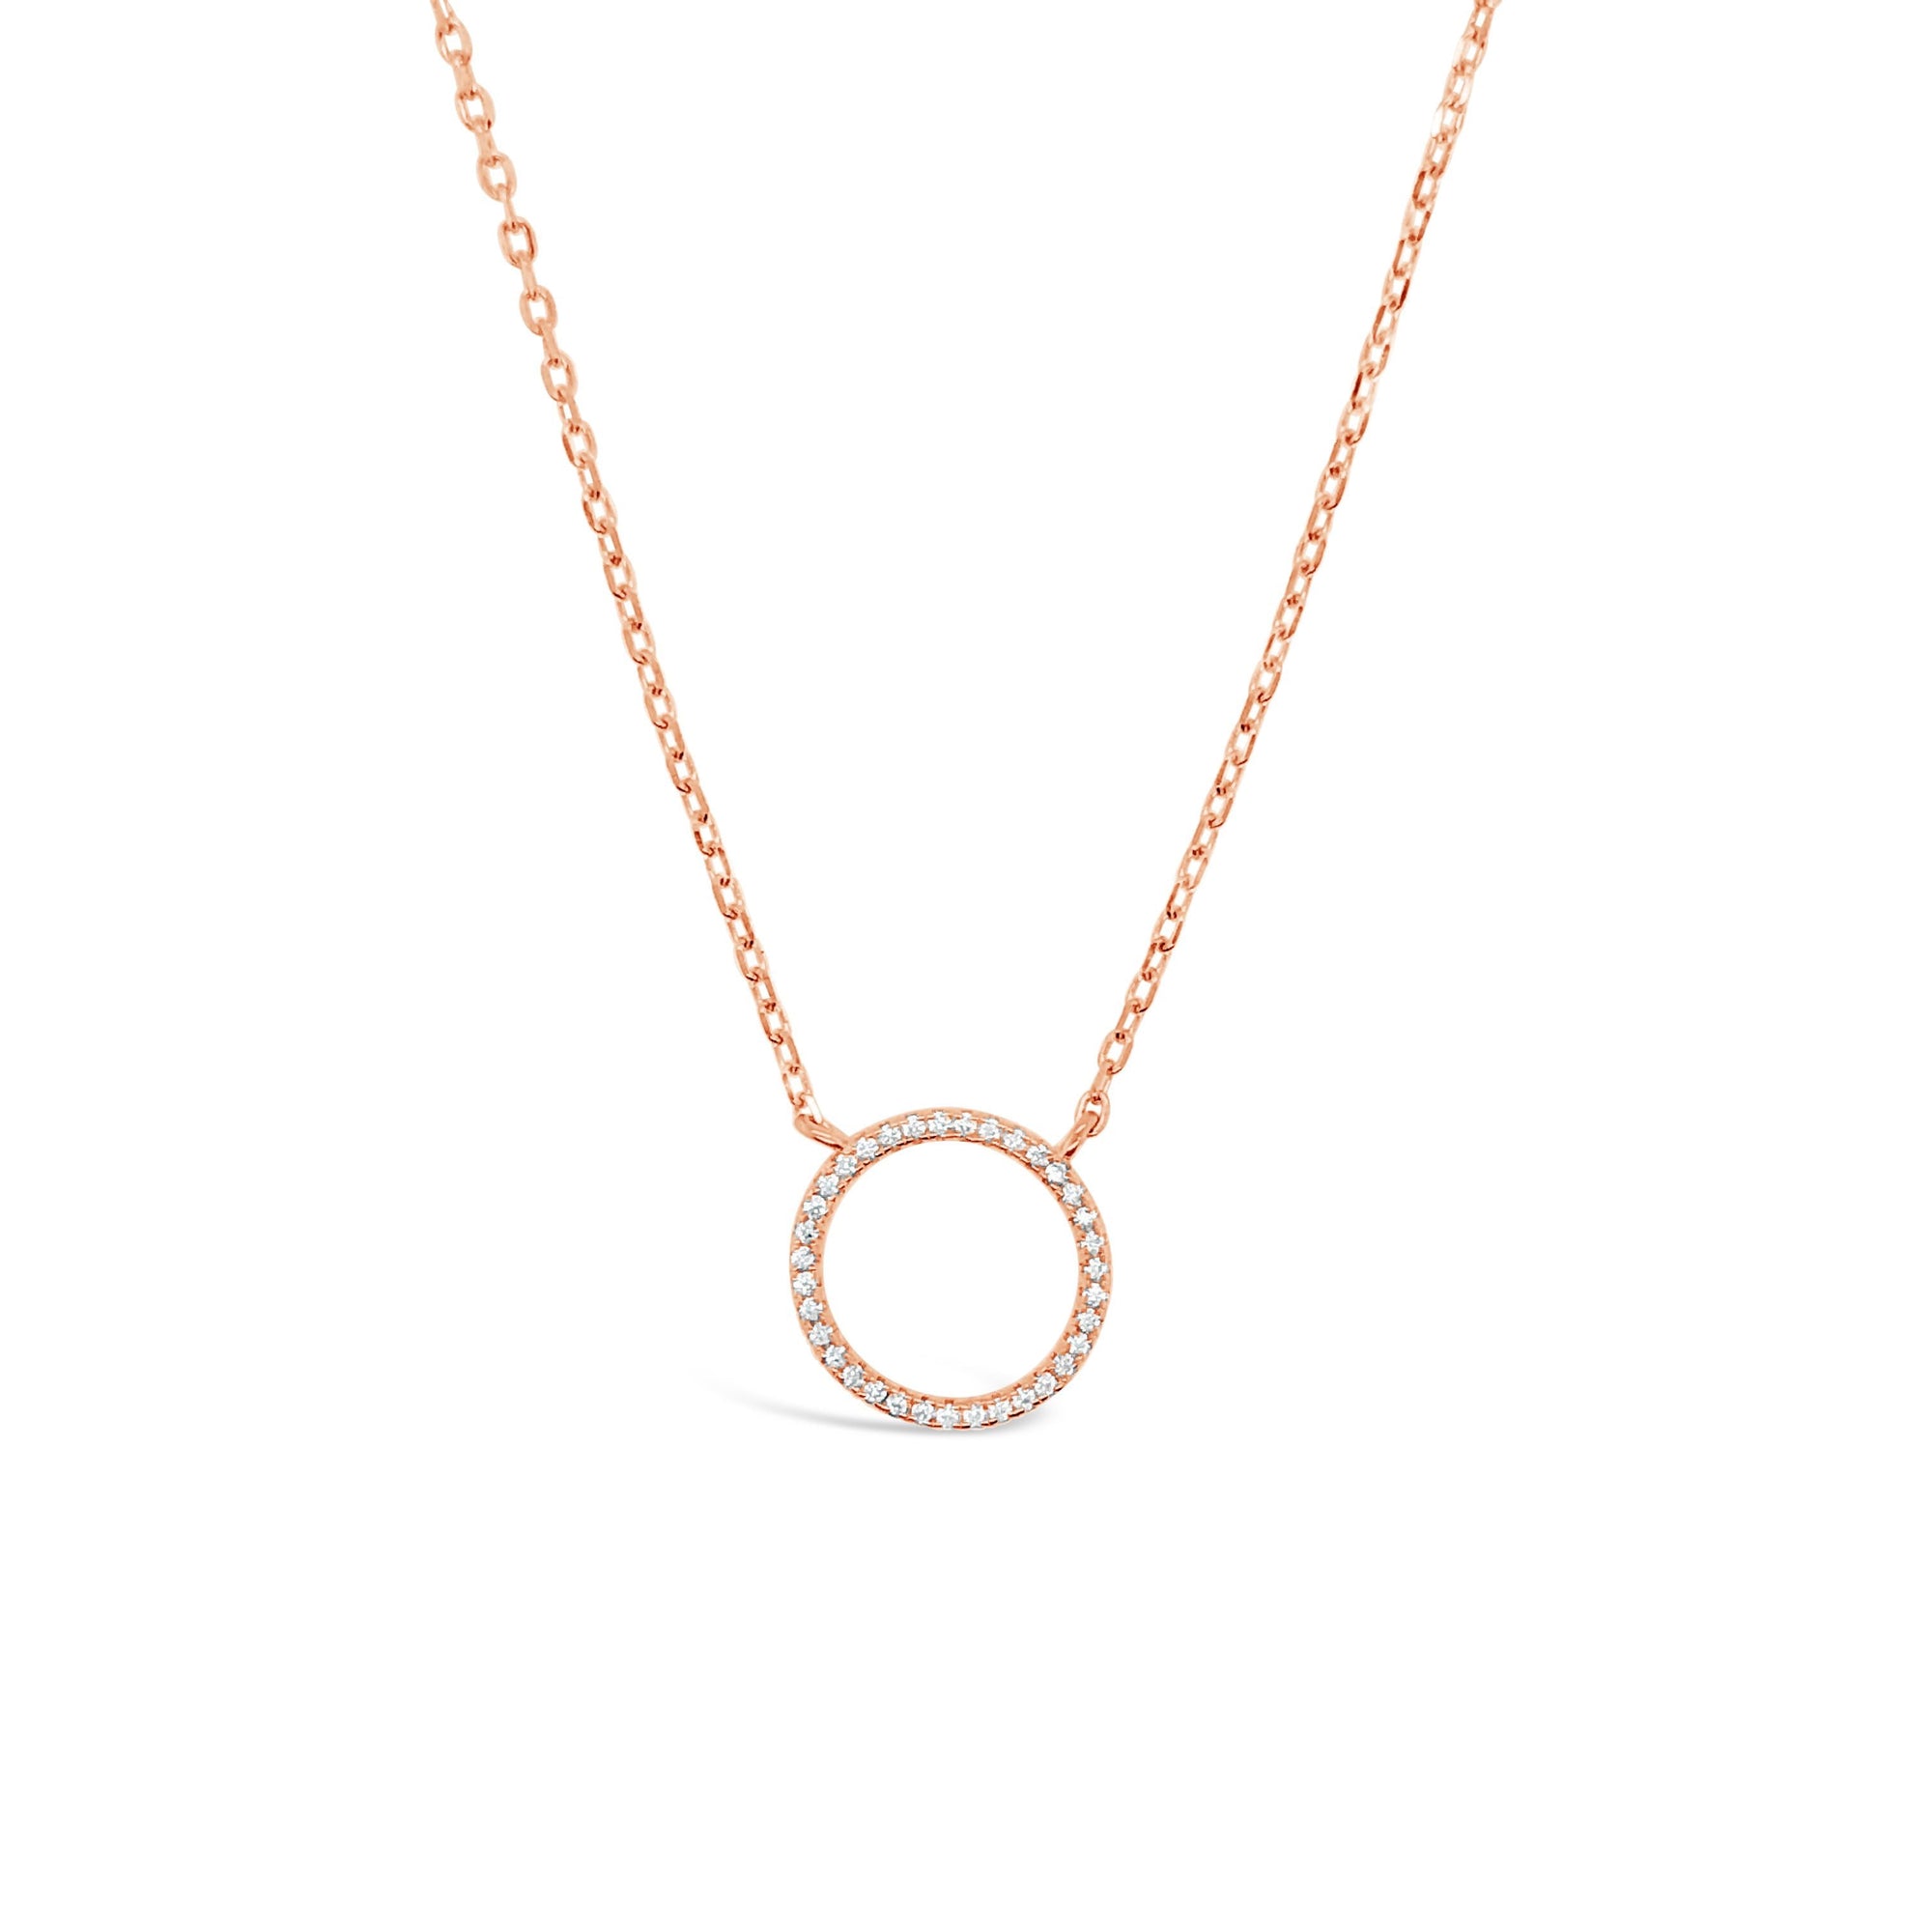 Duo Jewellery Necklaces Duo Circle of Life Necklace (Rose Gold Plated)